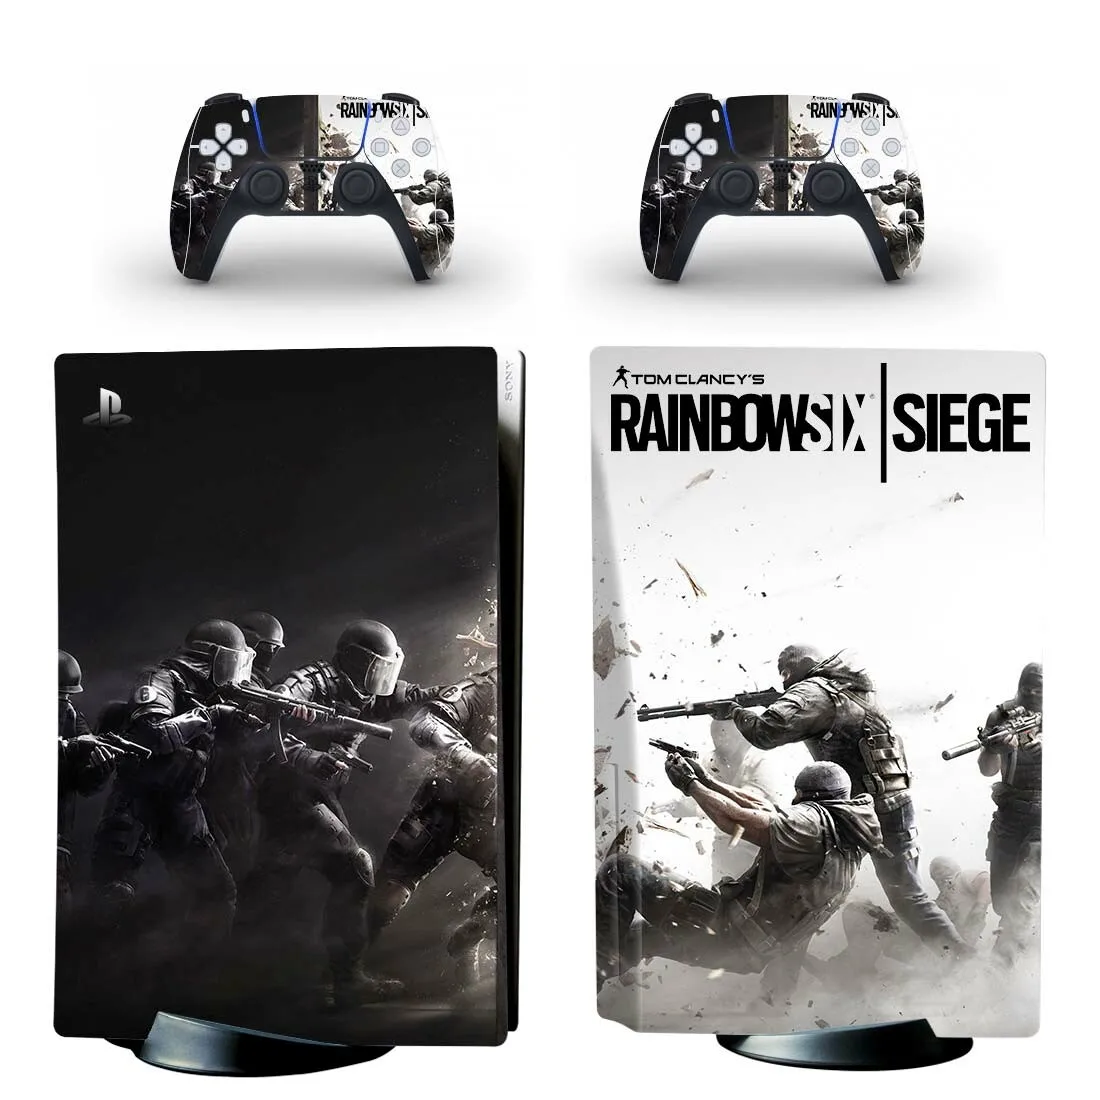 New Game Farcry 6 Ps5 Disk Digital Edition Skin Sticker Decal Cover For  Playstation 5 Console And 2 Controllers Ps5 Skin 4486 - Stickers -  AliExpress